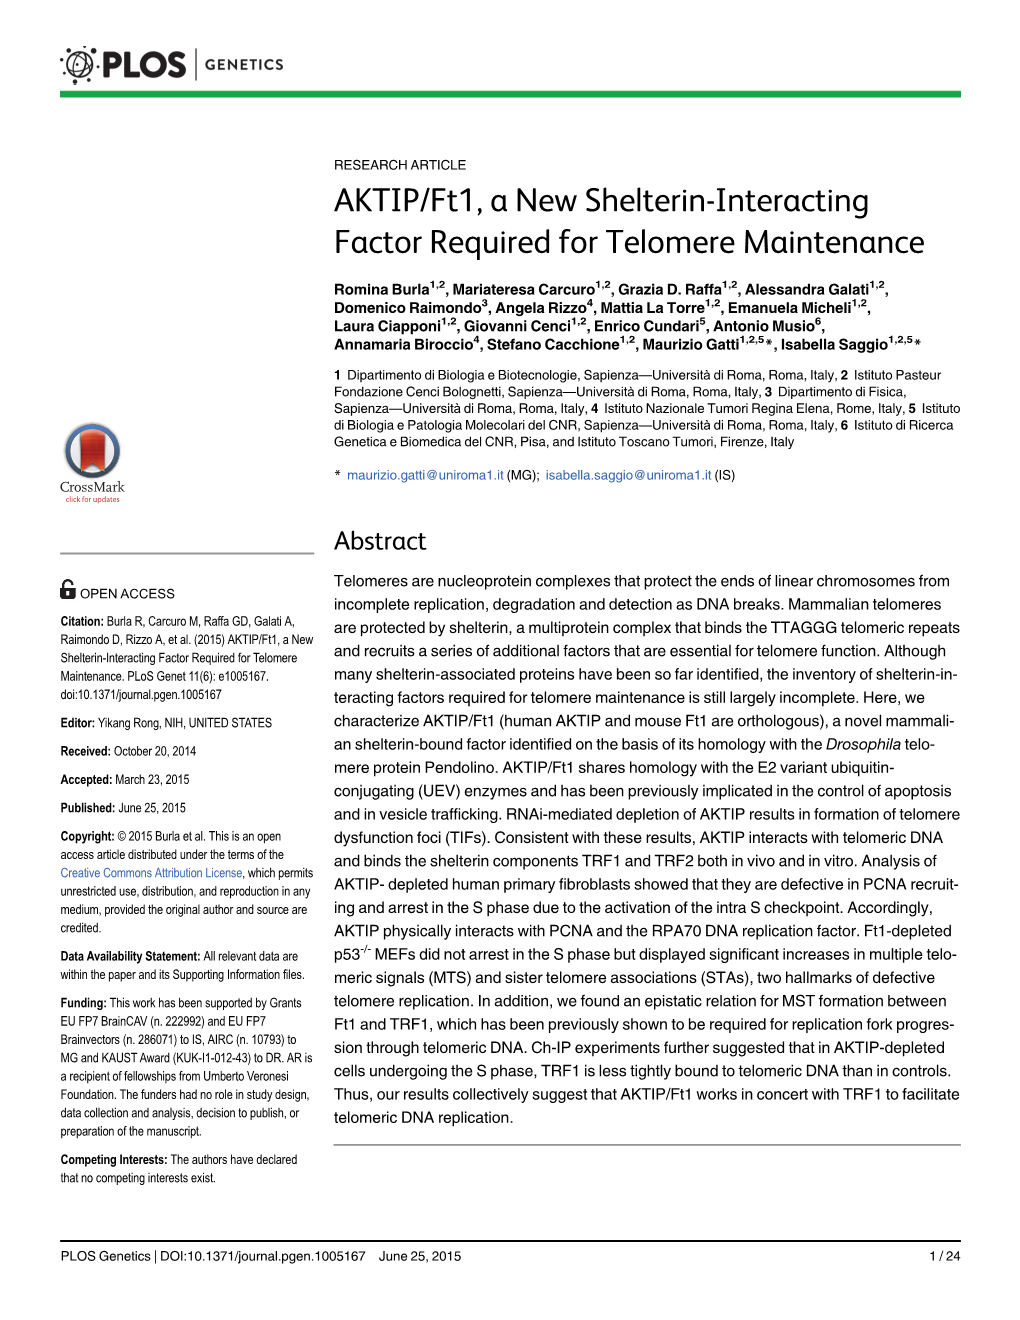 AKTIP/Ft1, a New Shelterin-Interacting Factor Required for Telomere Maintenance